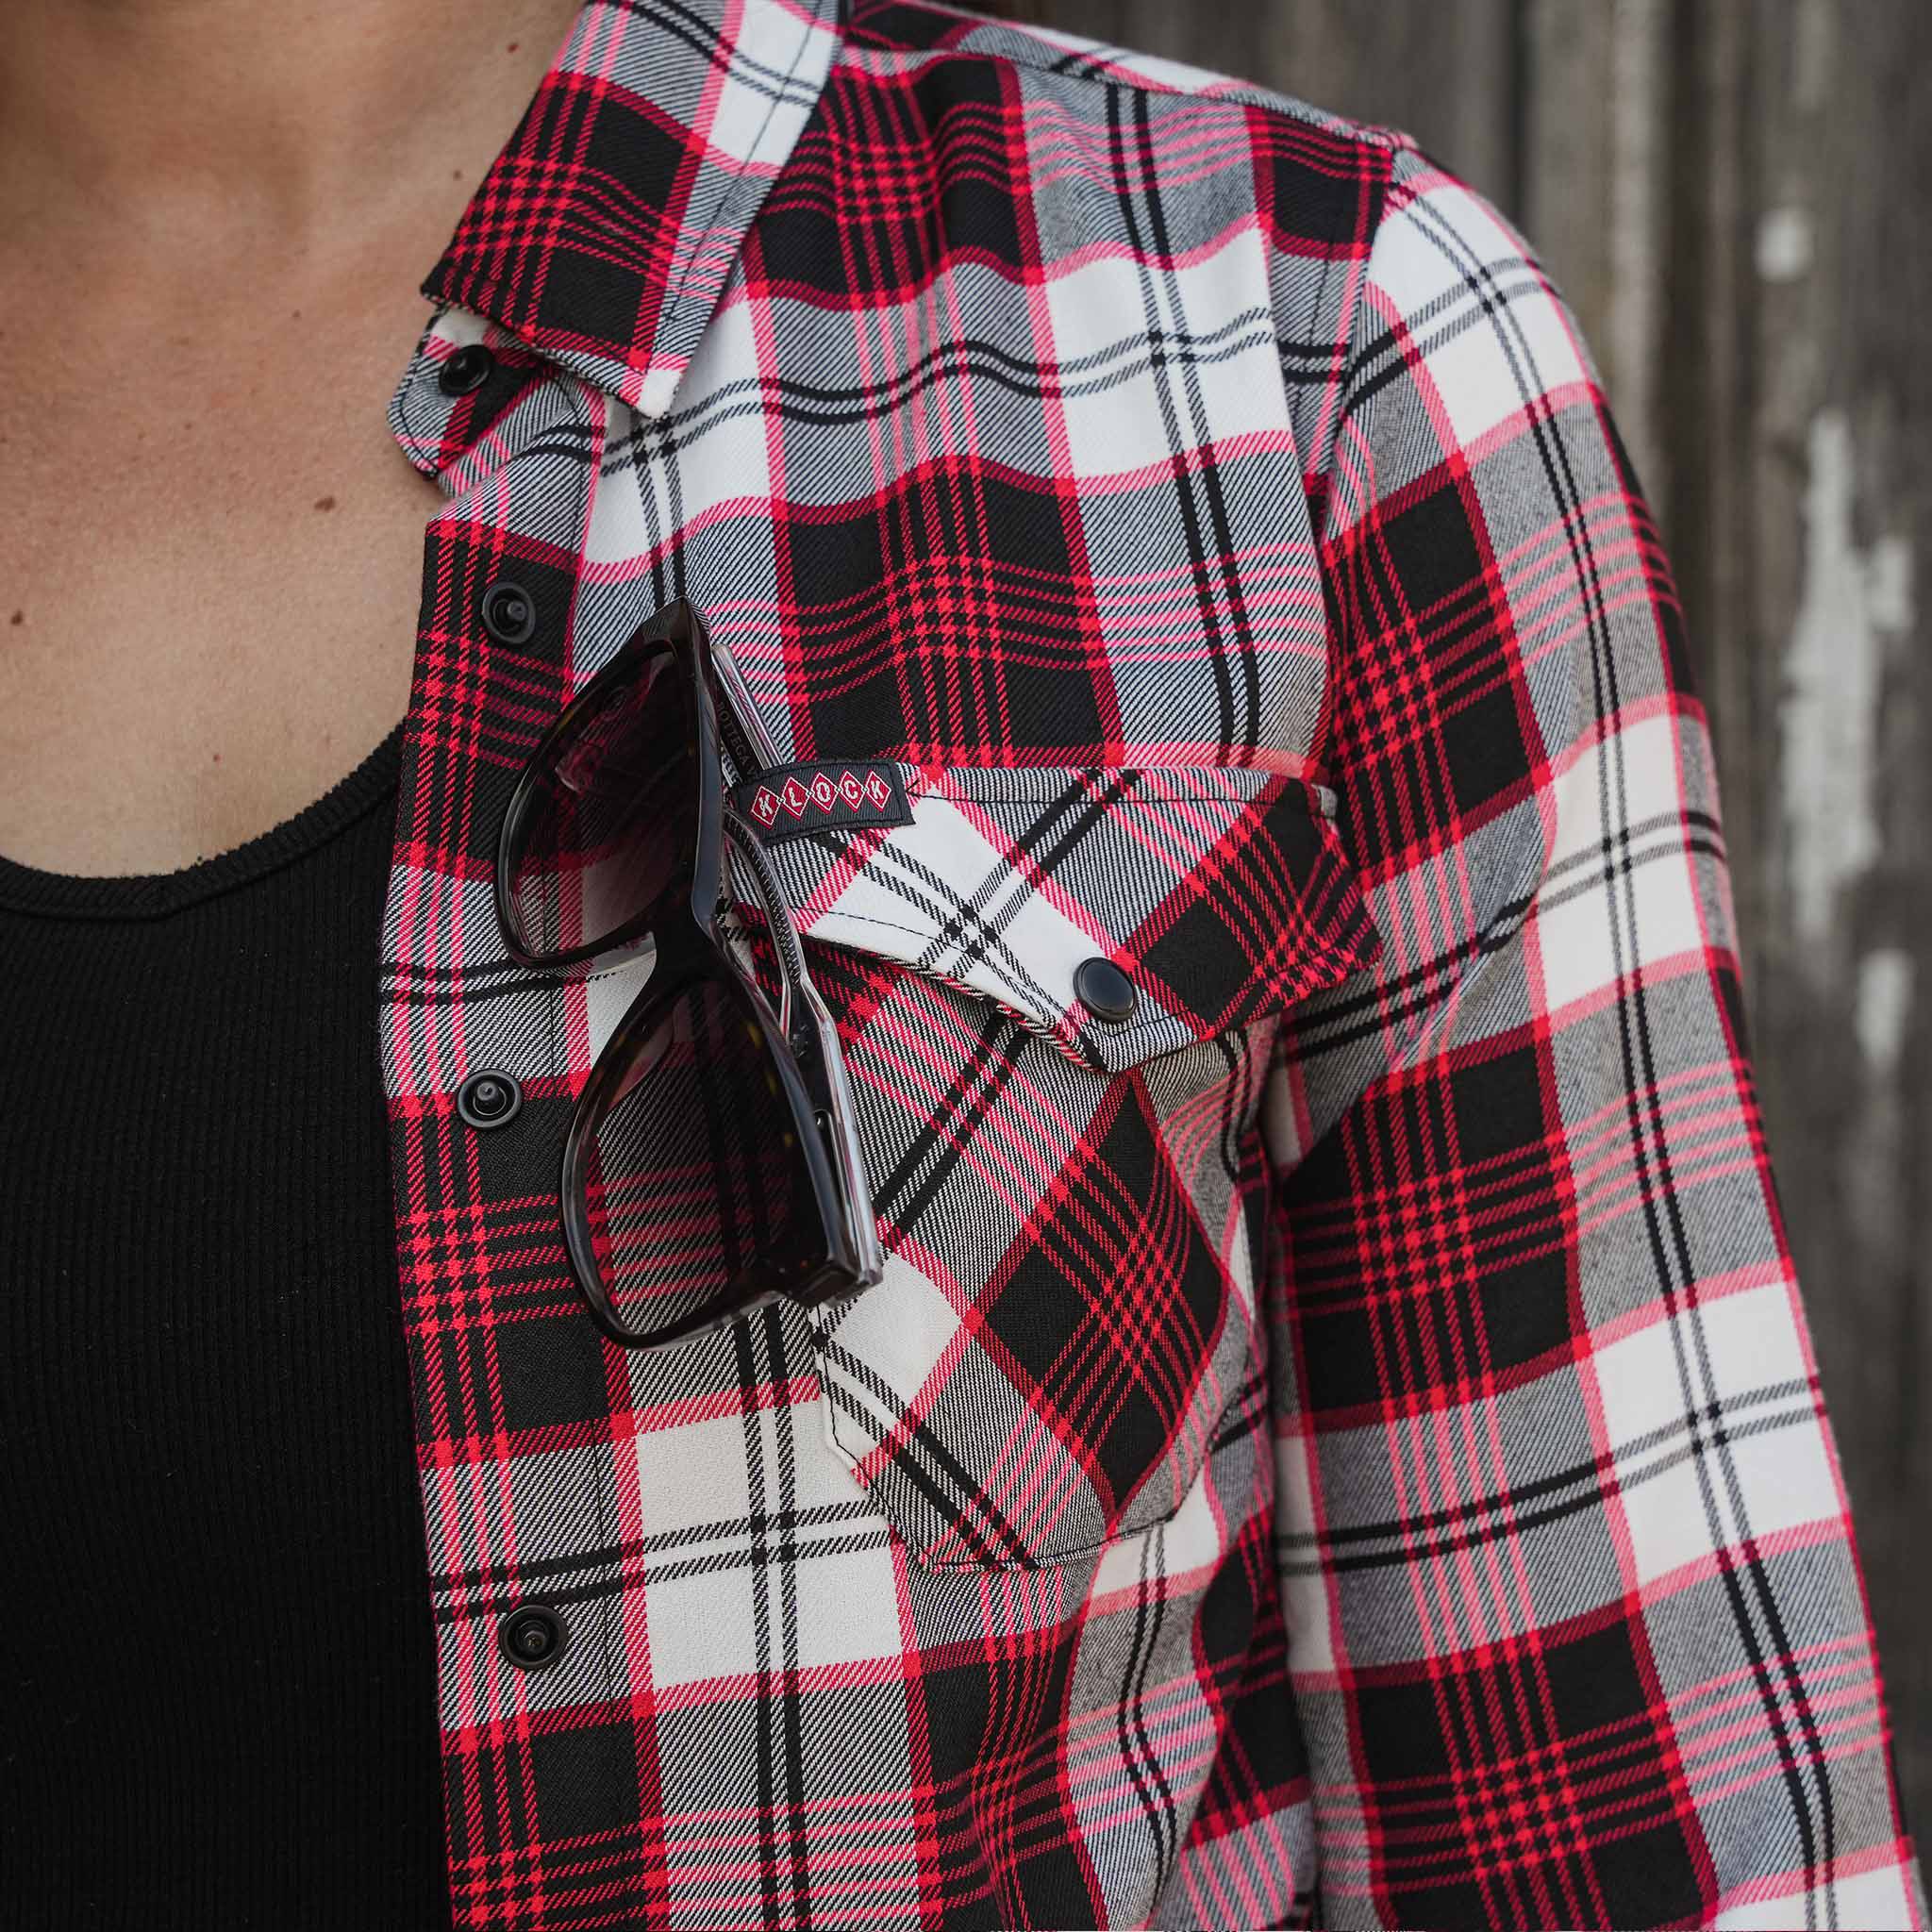 Klock Werks x Dixxon 25th Anniversary Flannel with dual button down flap chest pockets with utility slot for pens, sunglasses, etc.(Dual button down flap chest pockets with utility slot for pens, sunglasses, etc.)